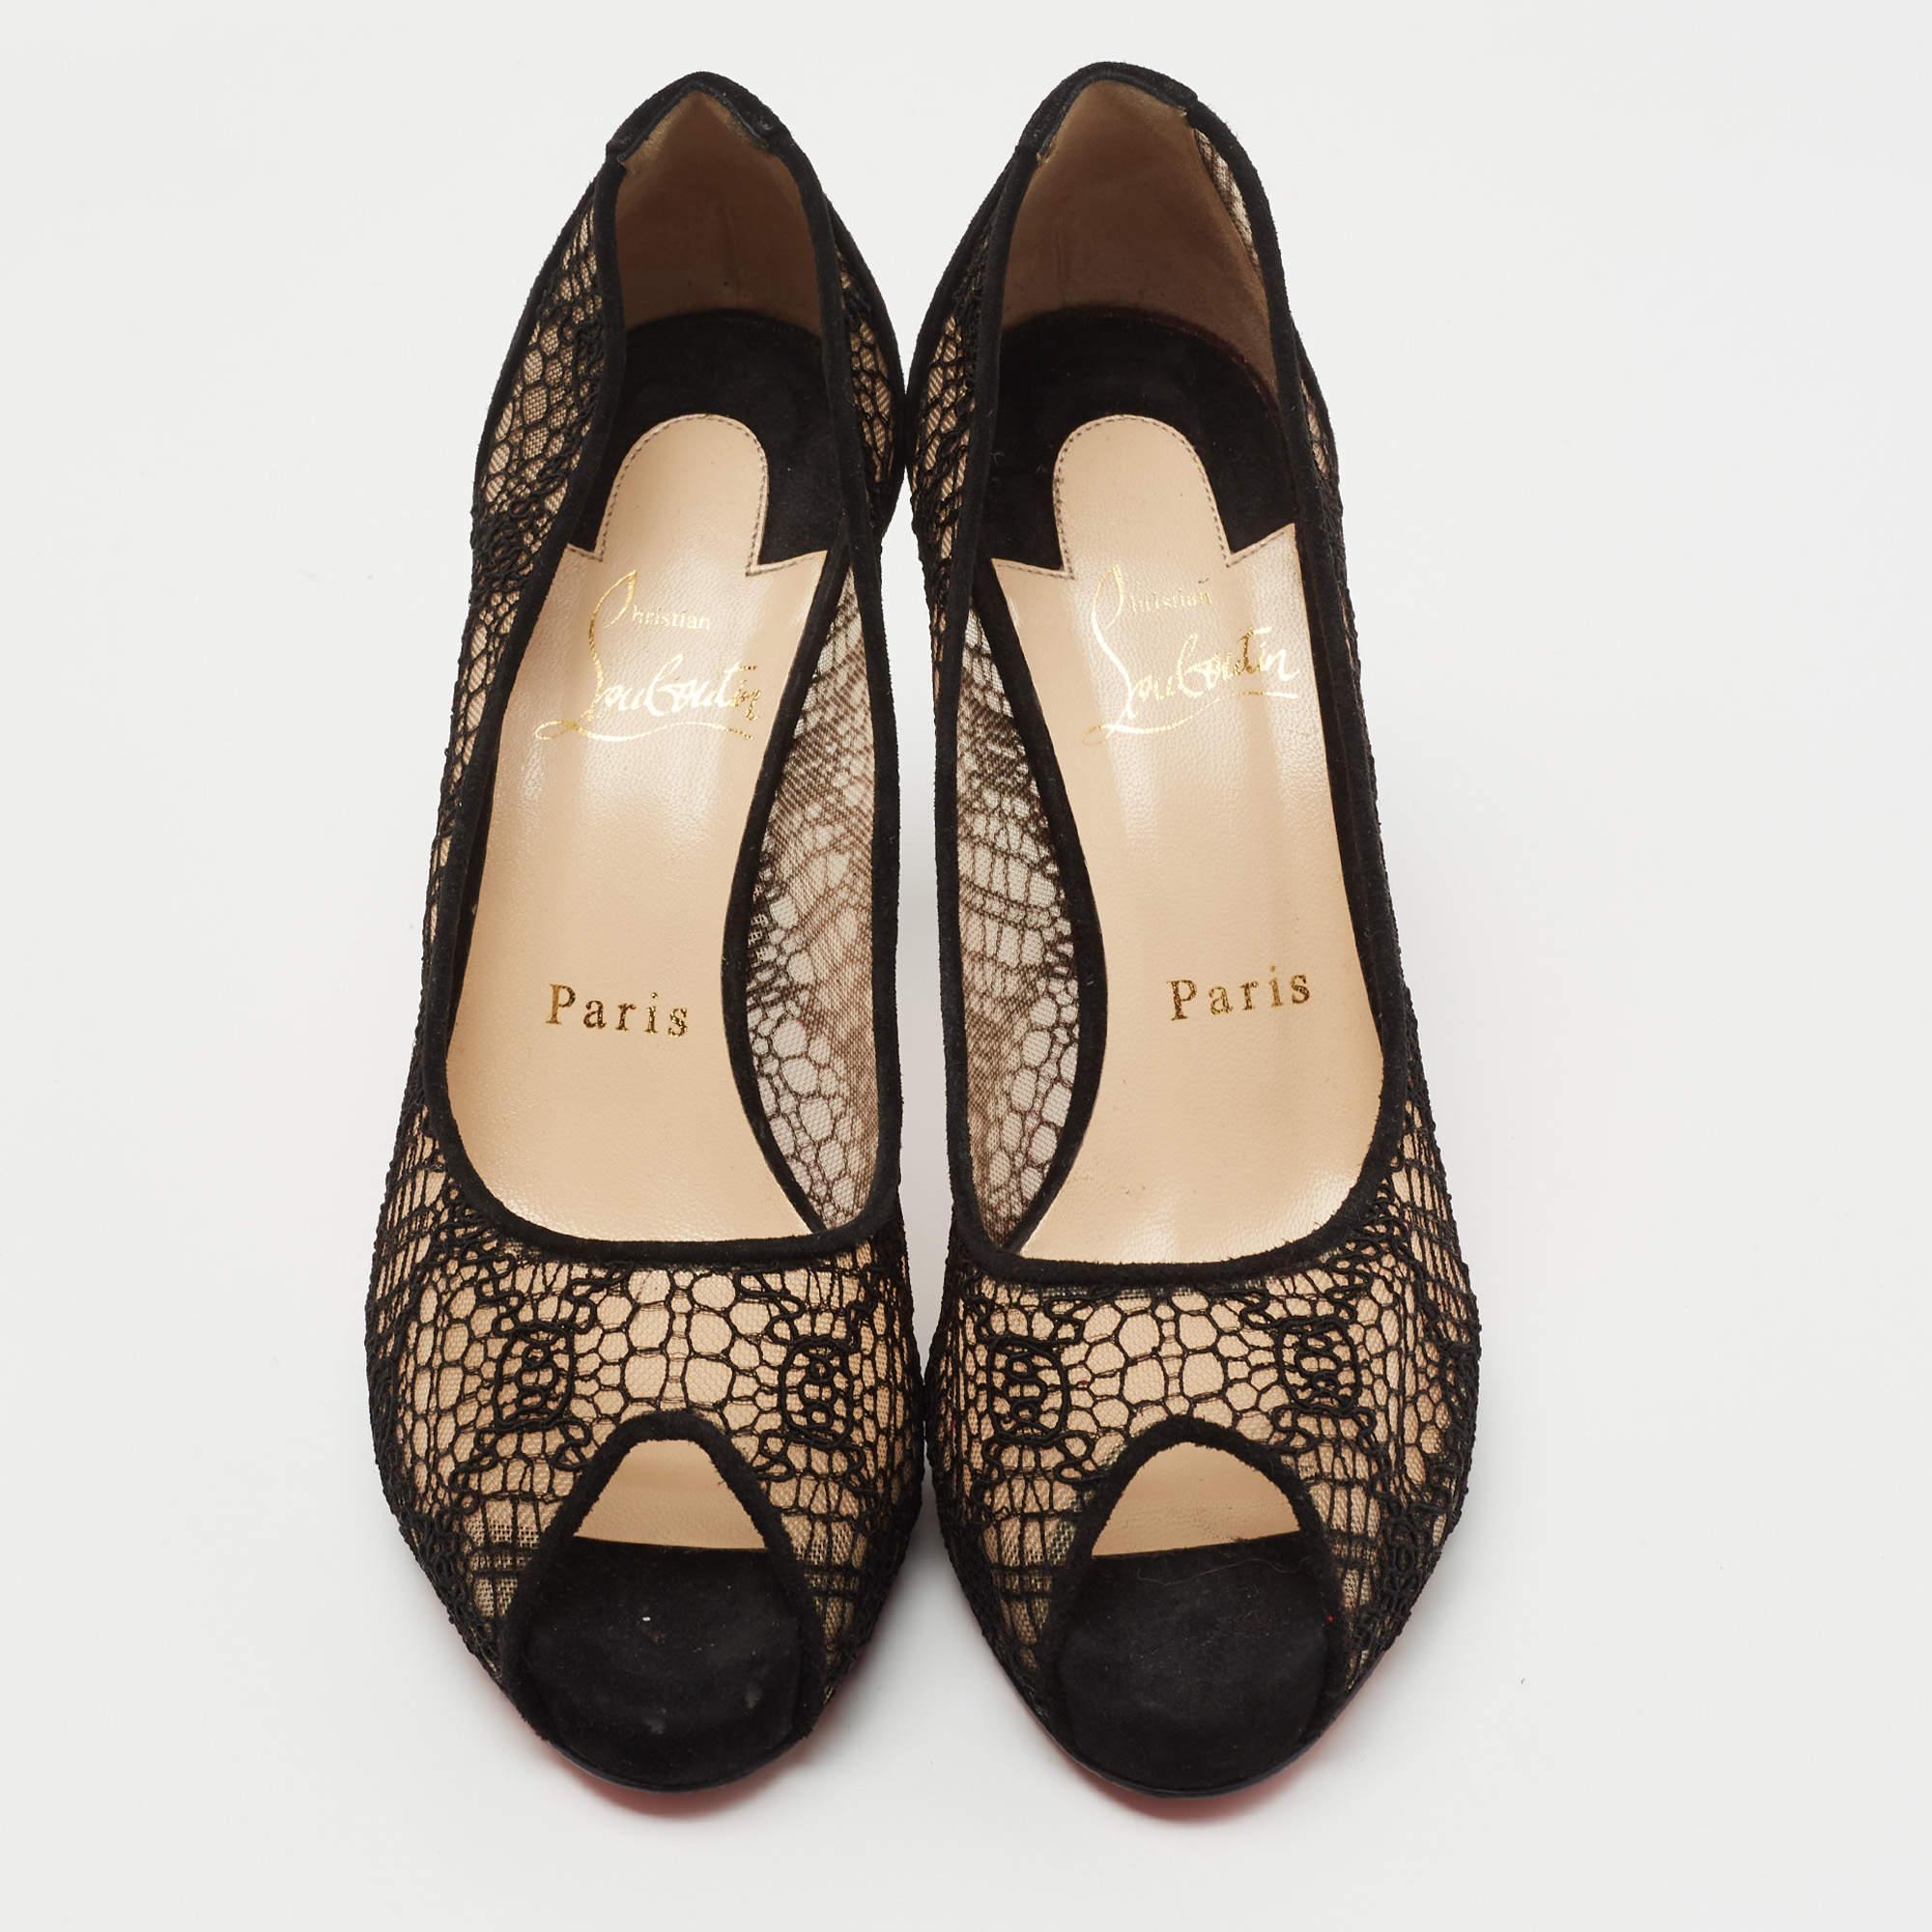 These timeless CL pumps are meant to last you season after season. Crafted using lace & suede, they have a sleek silhouette and a comfortable fit.

Includes
Original Dustbag

Heel Size: 9.5 cm